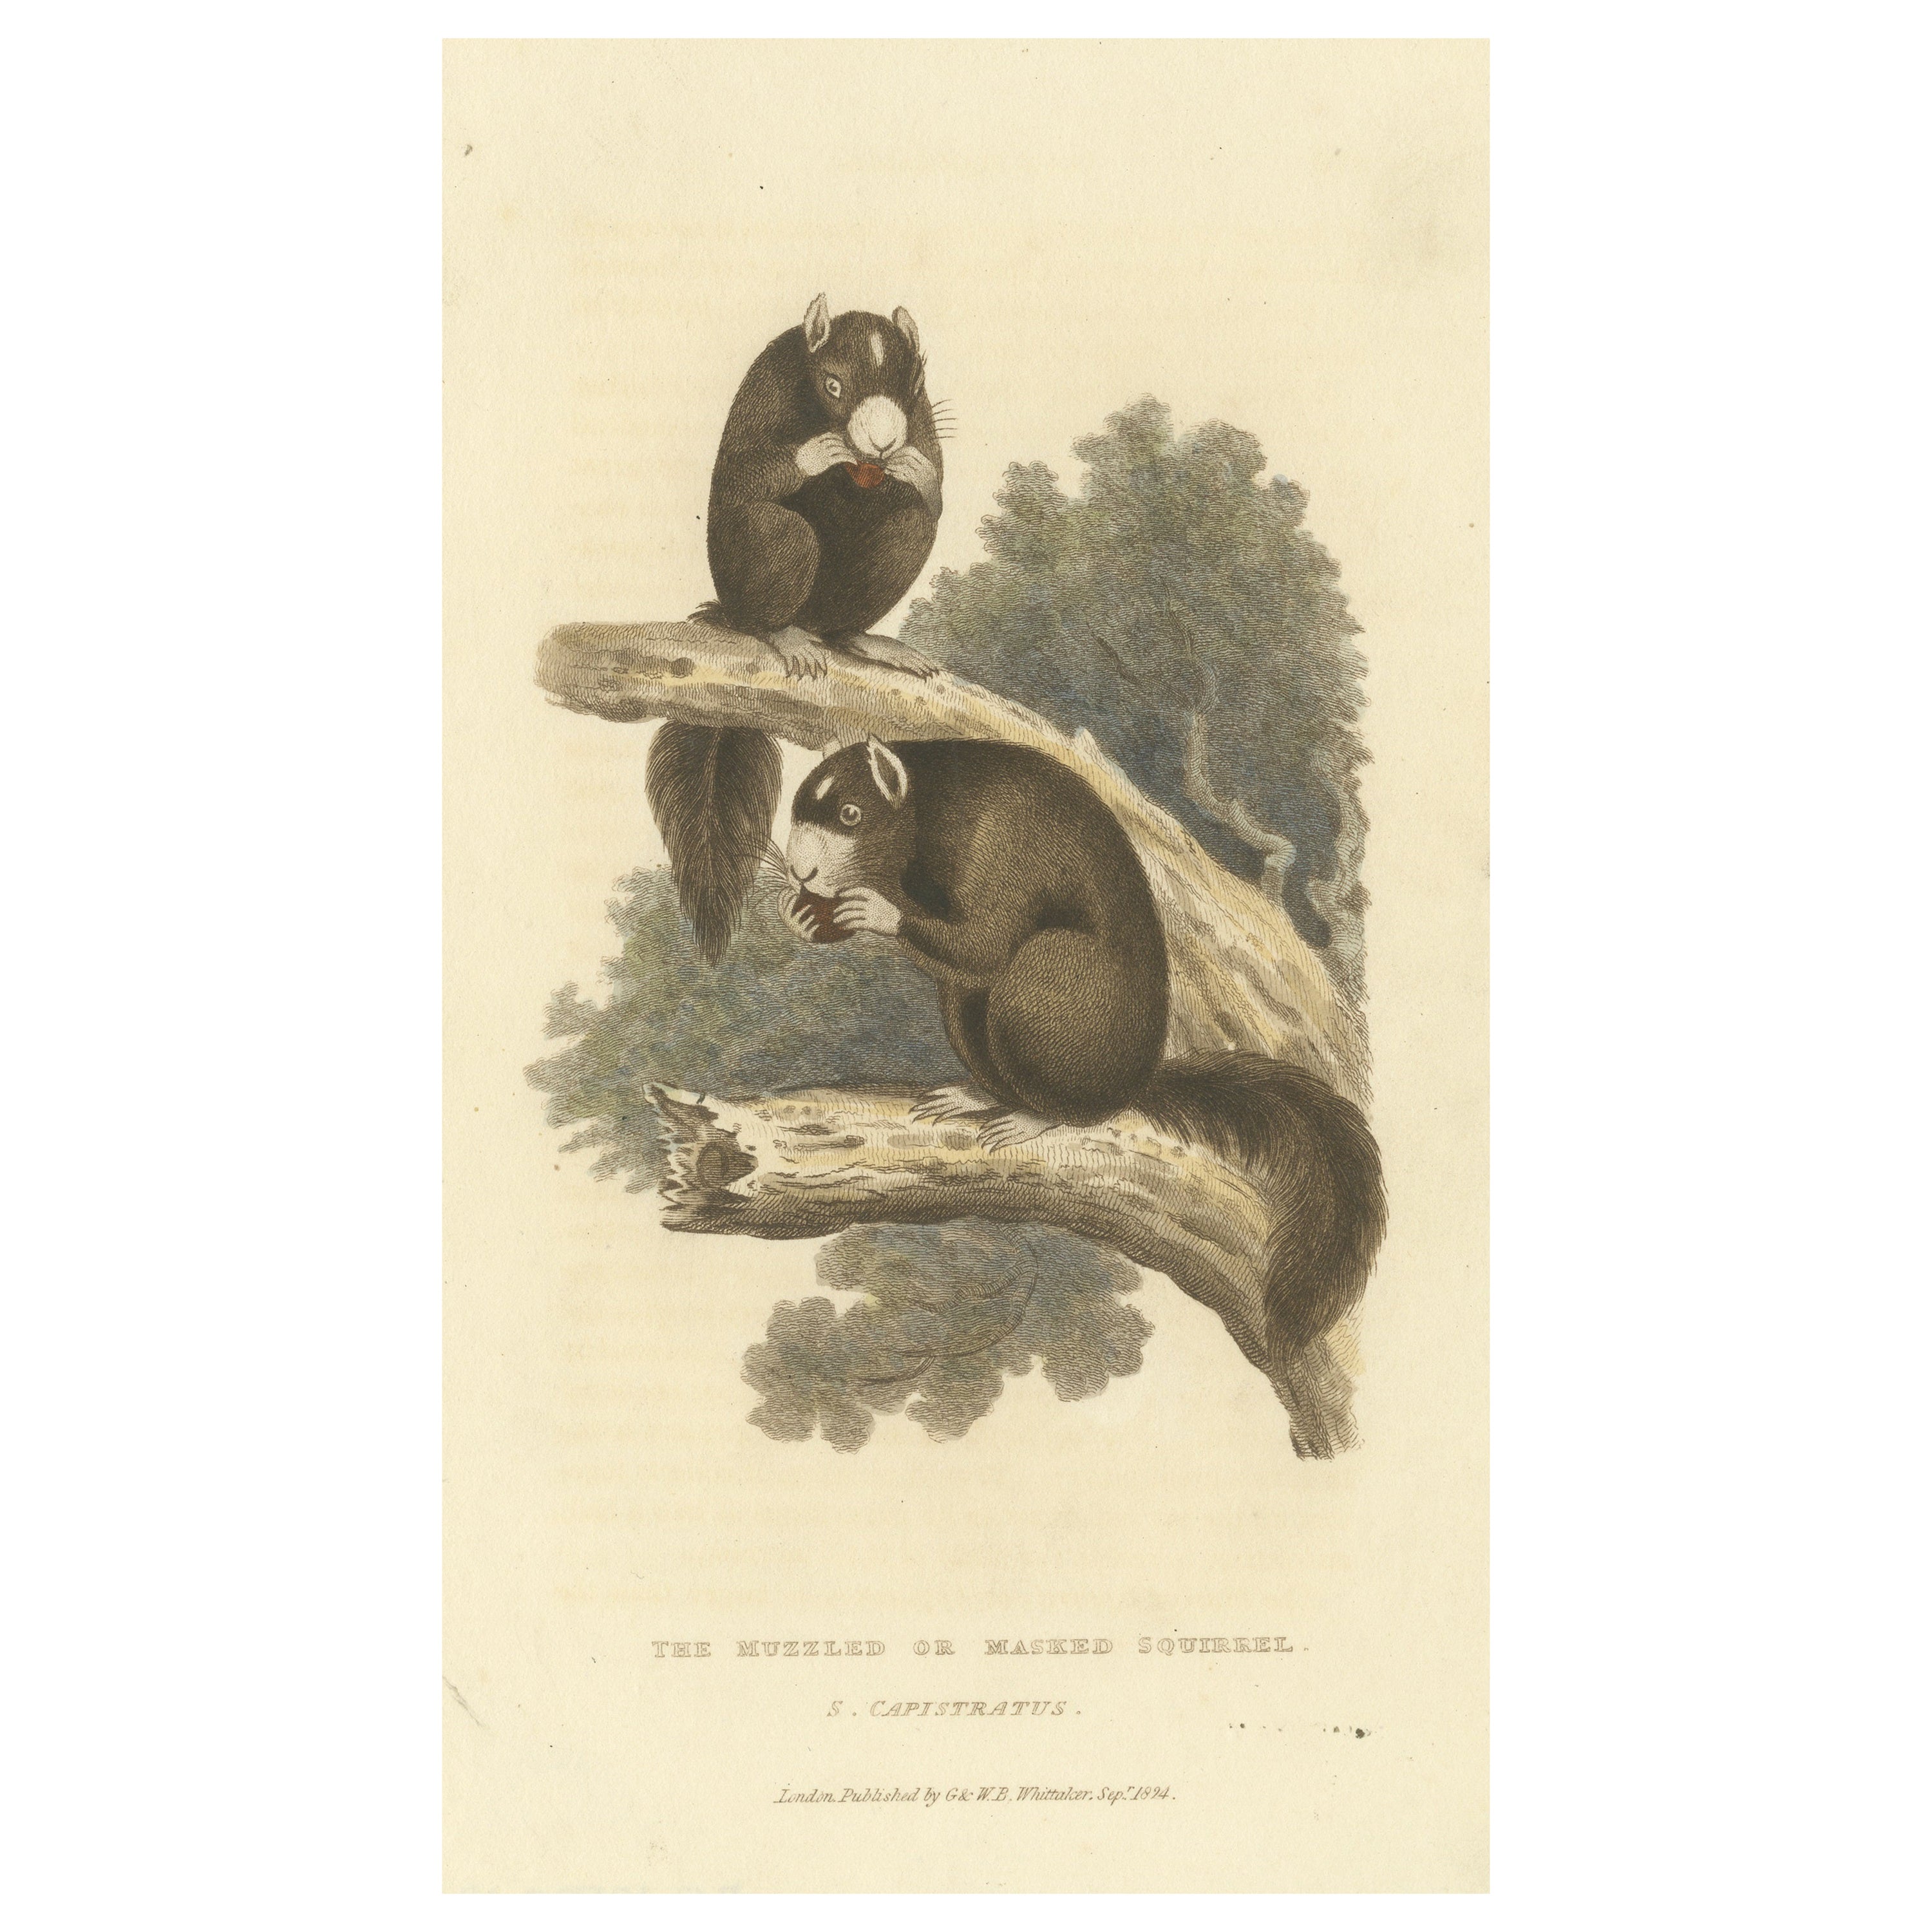 Antique Print with Hand Coloring of a Masked Squirrel For Sale